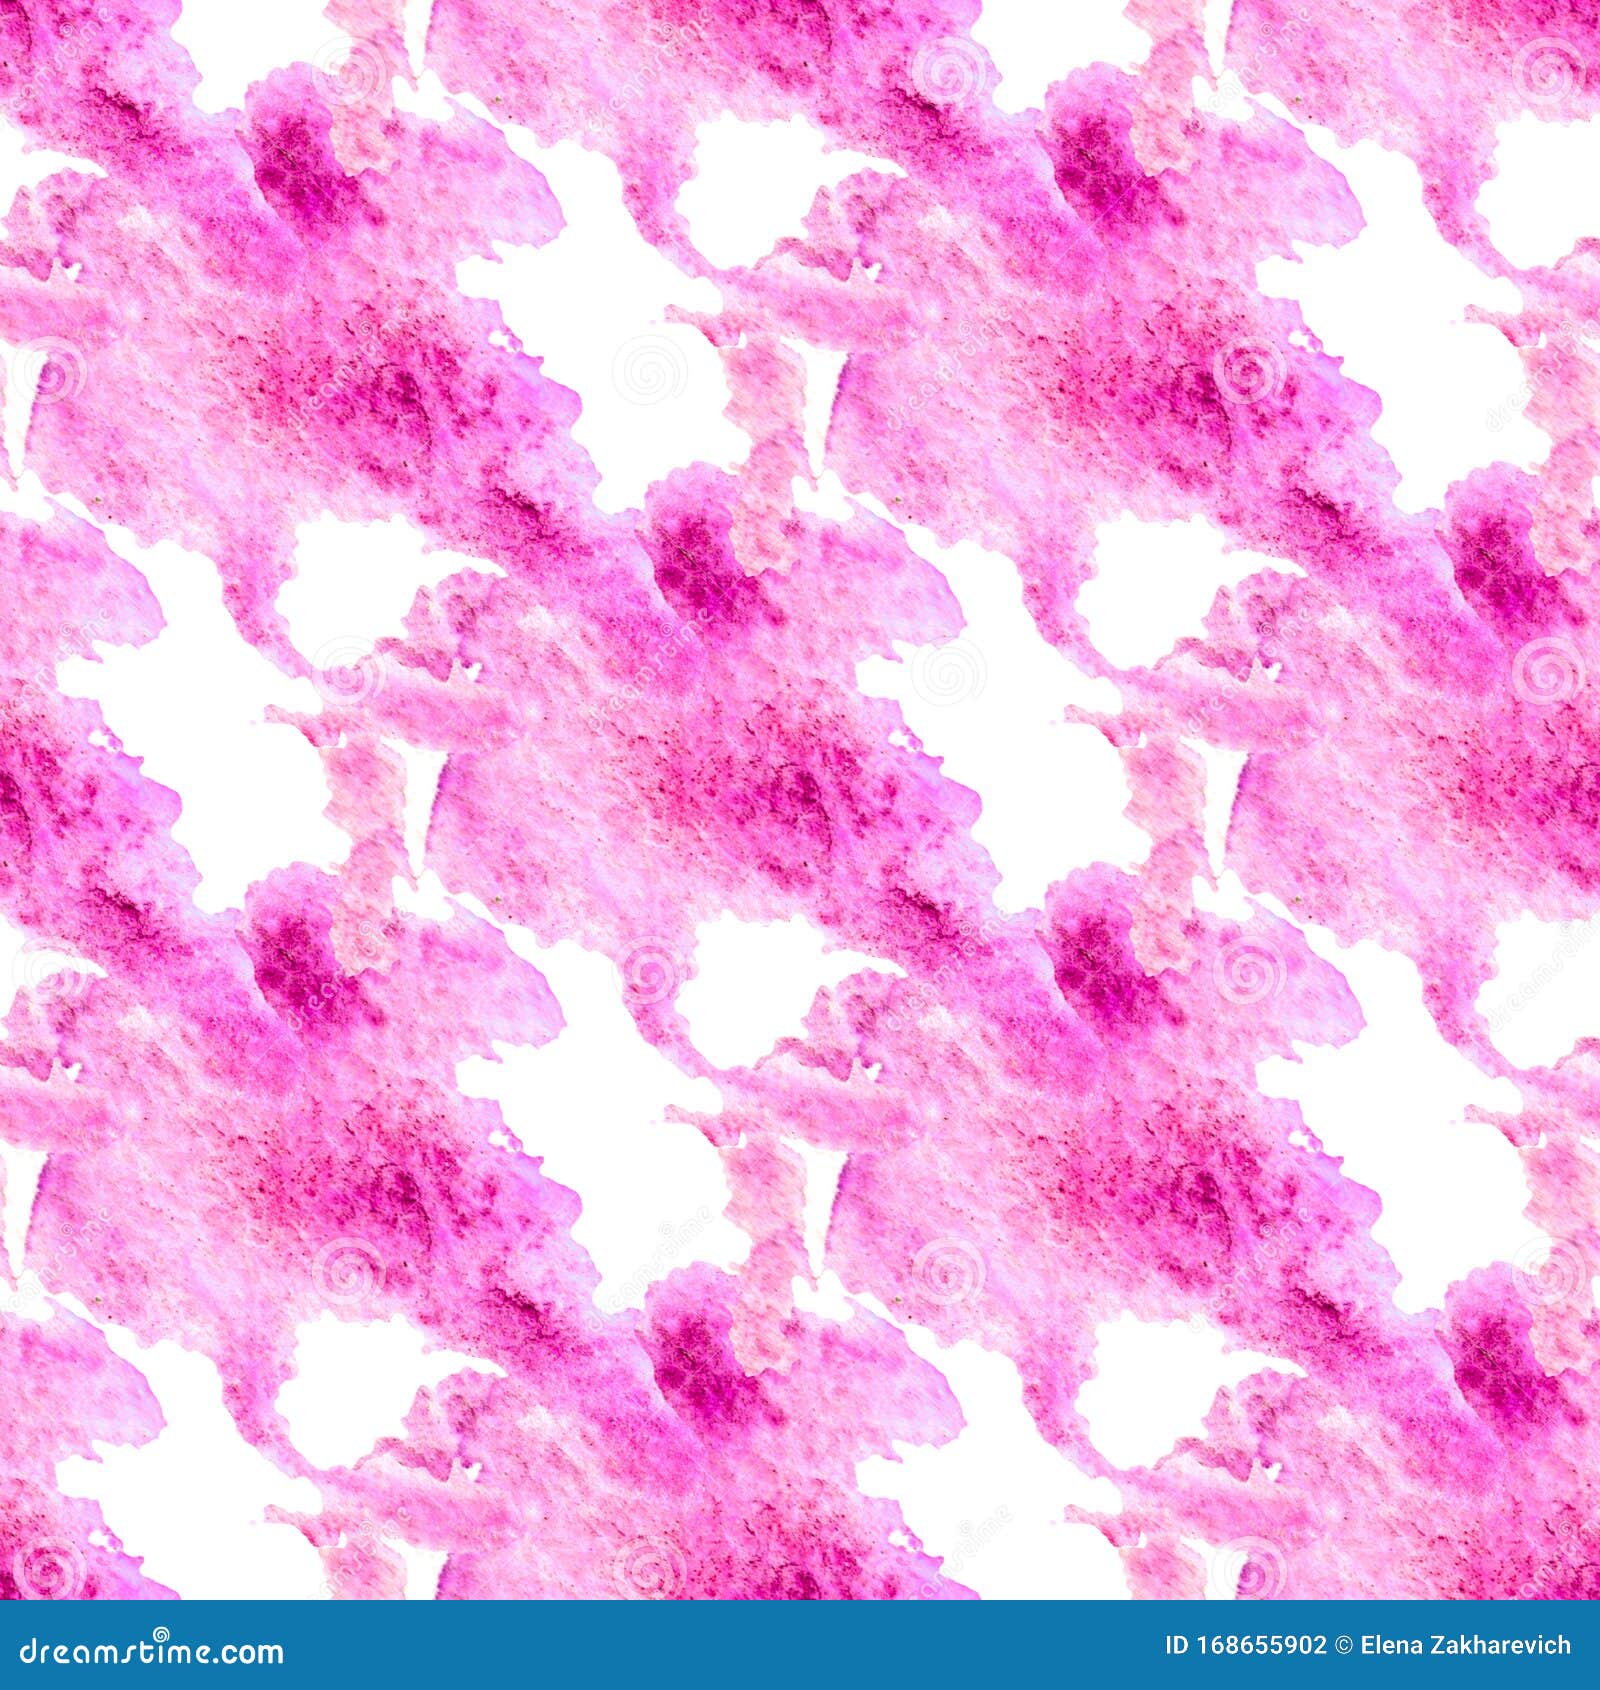 Abstract Pink Spots. Watercolor Seamless Pattern. Stock Photo - Image ...